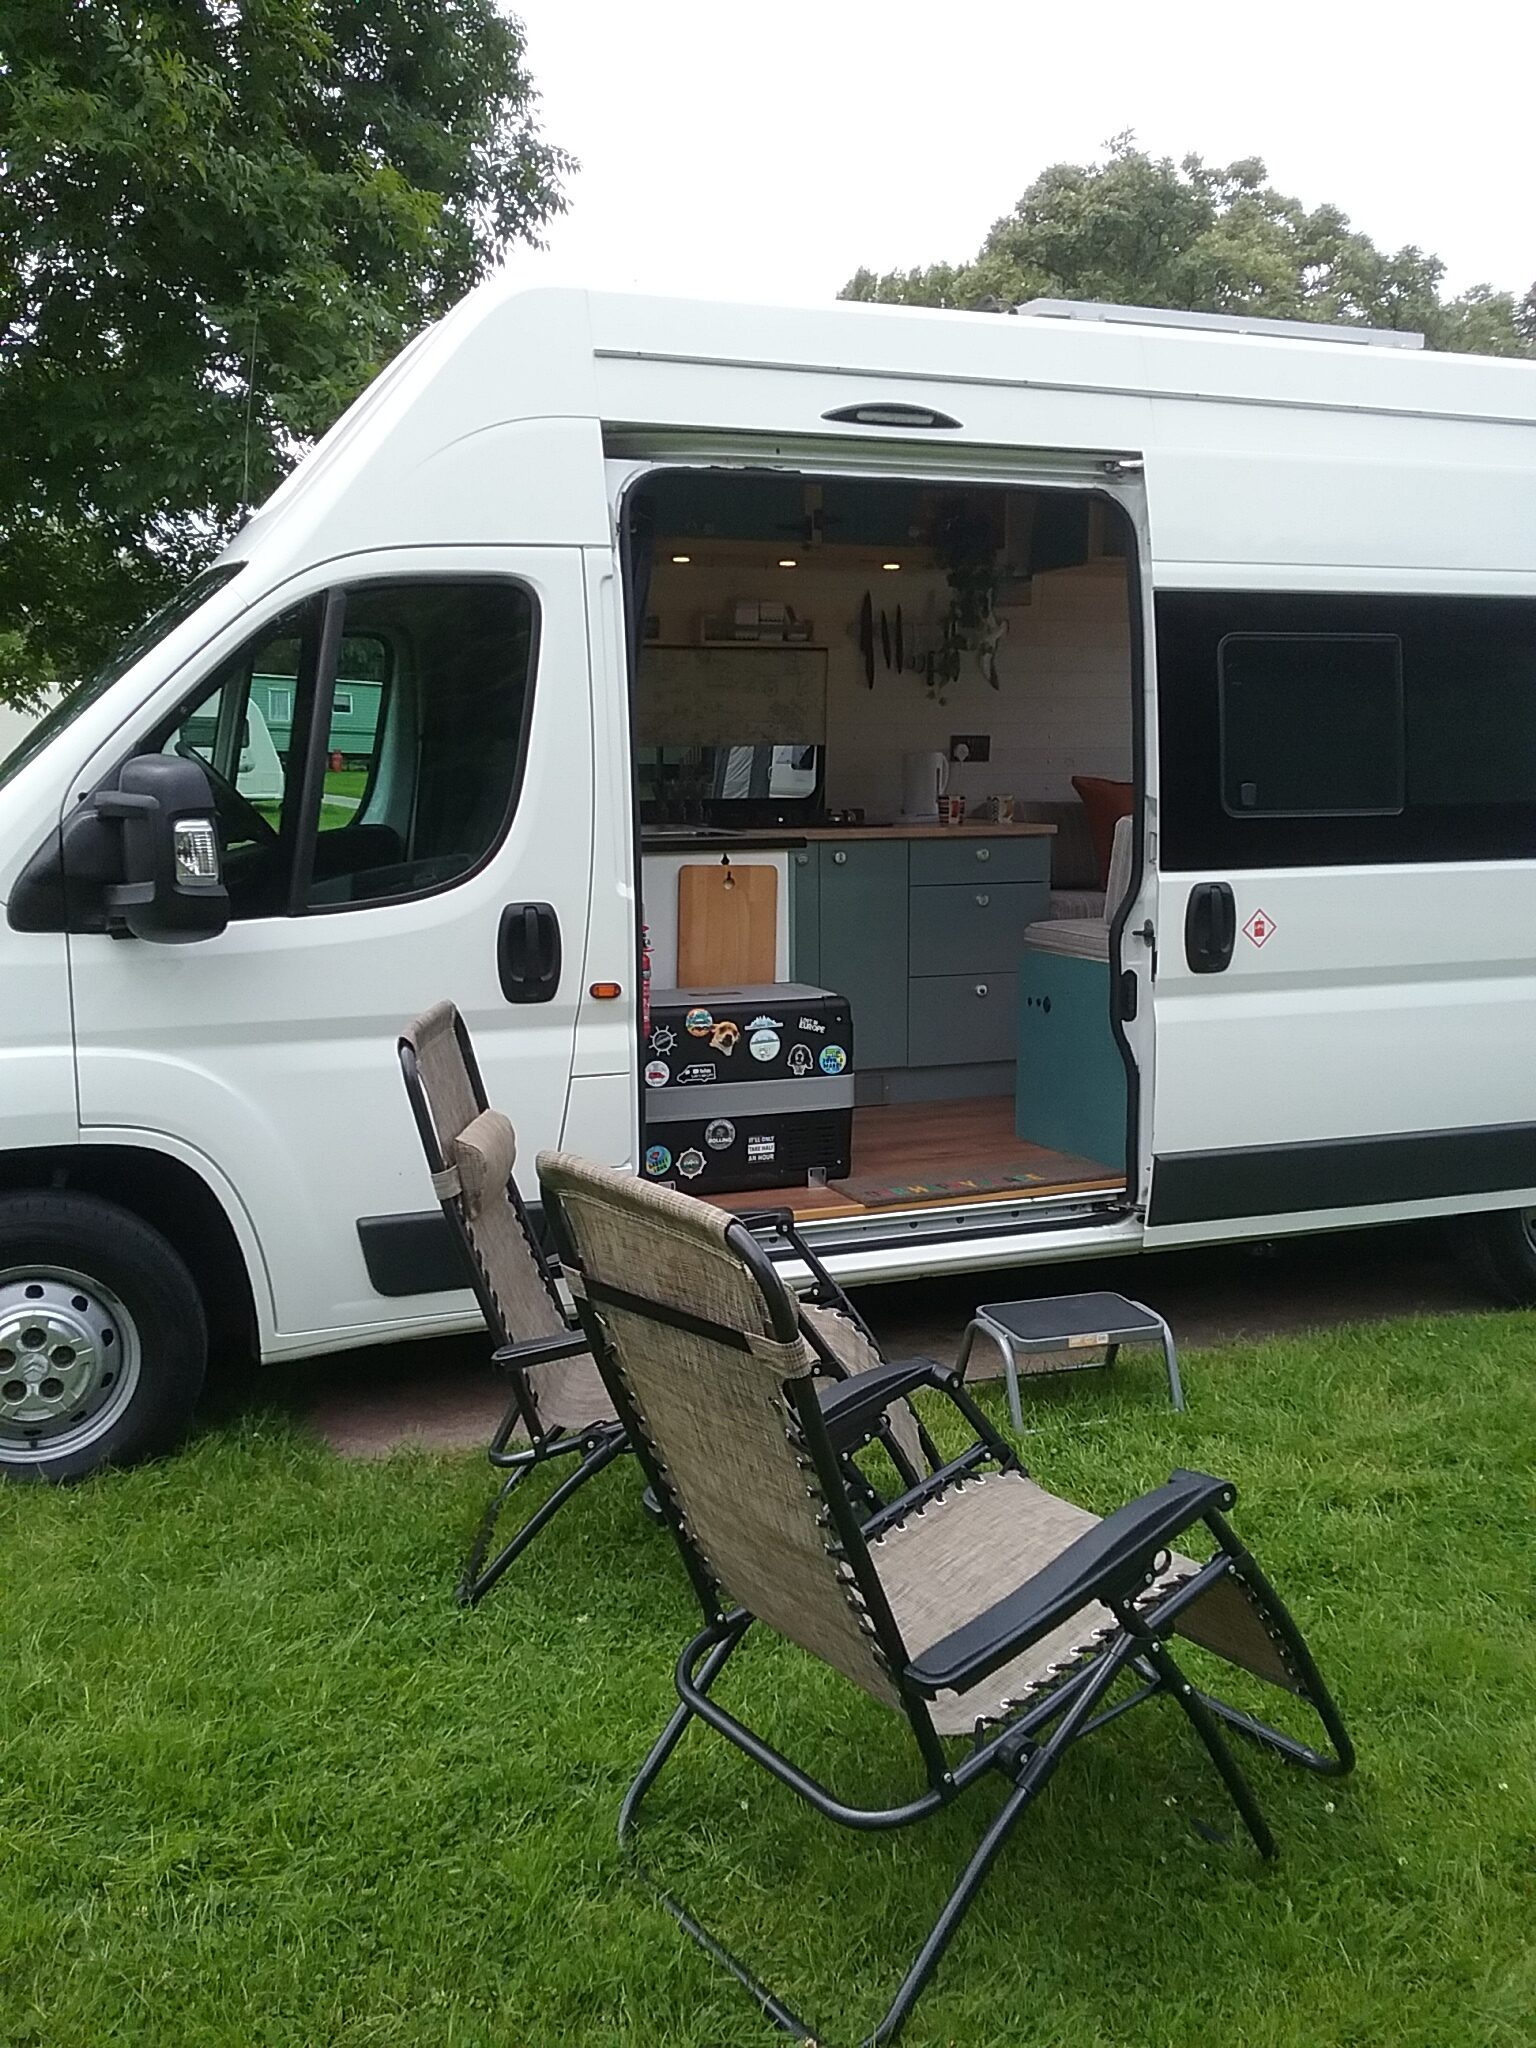 A white camper van with its side door open reveals a compact interior. Four folding chairs are set up on the grassy area outside. Inside the van are visible kitchen elements including a counter, sink, and cupboards. The scene depicts a cozy and organized mobile living space.